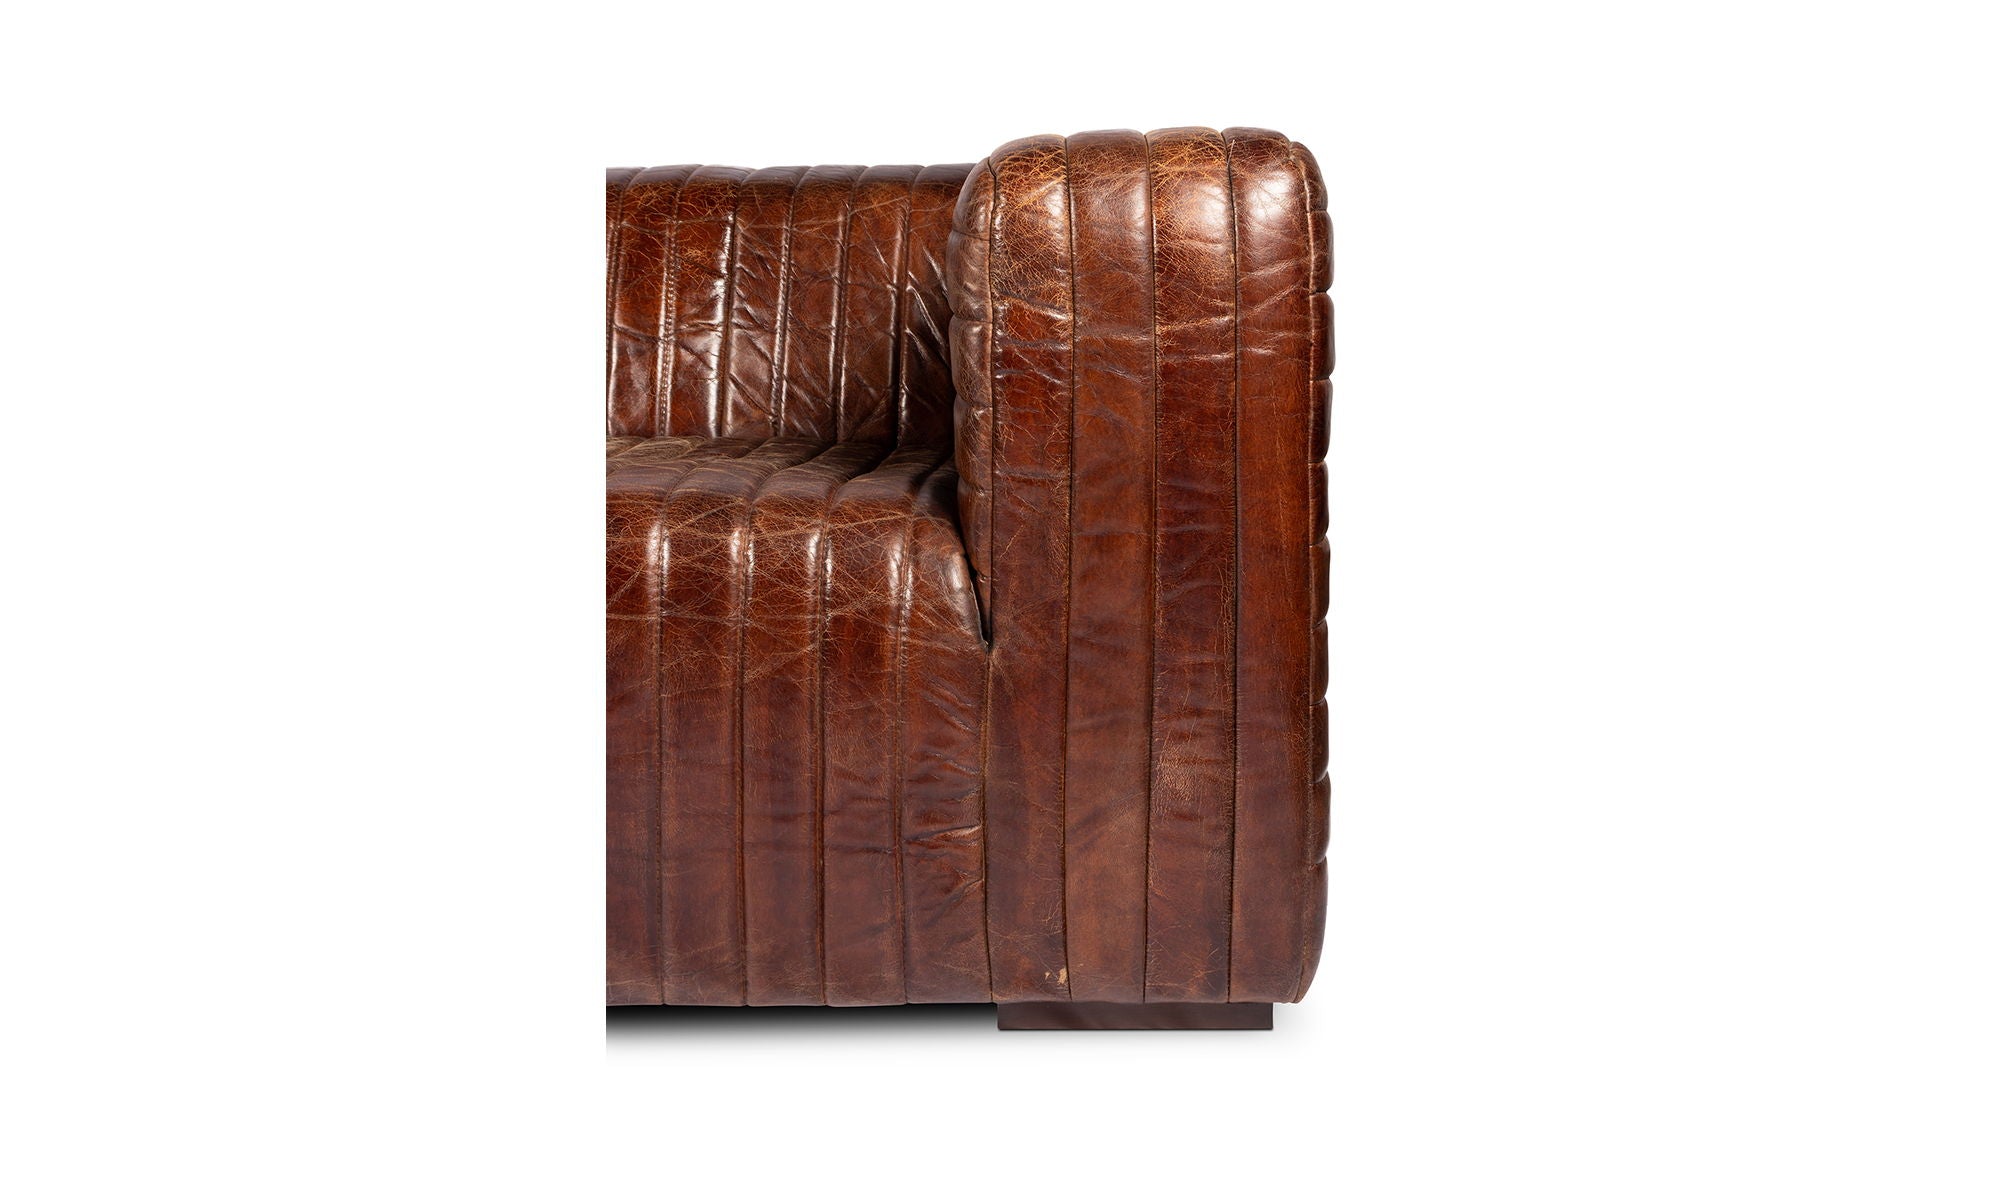 Castle Sofa - Dark Brown Top-Grain Leather - Channel-Stitched Design - Stylish Living Room Furniture